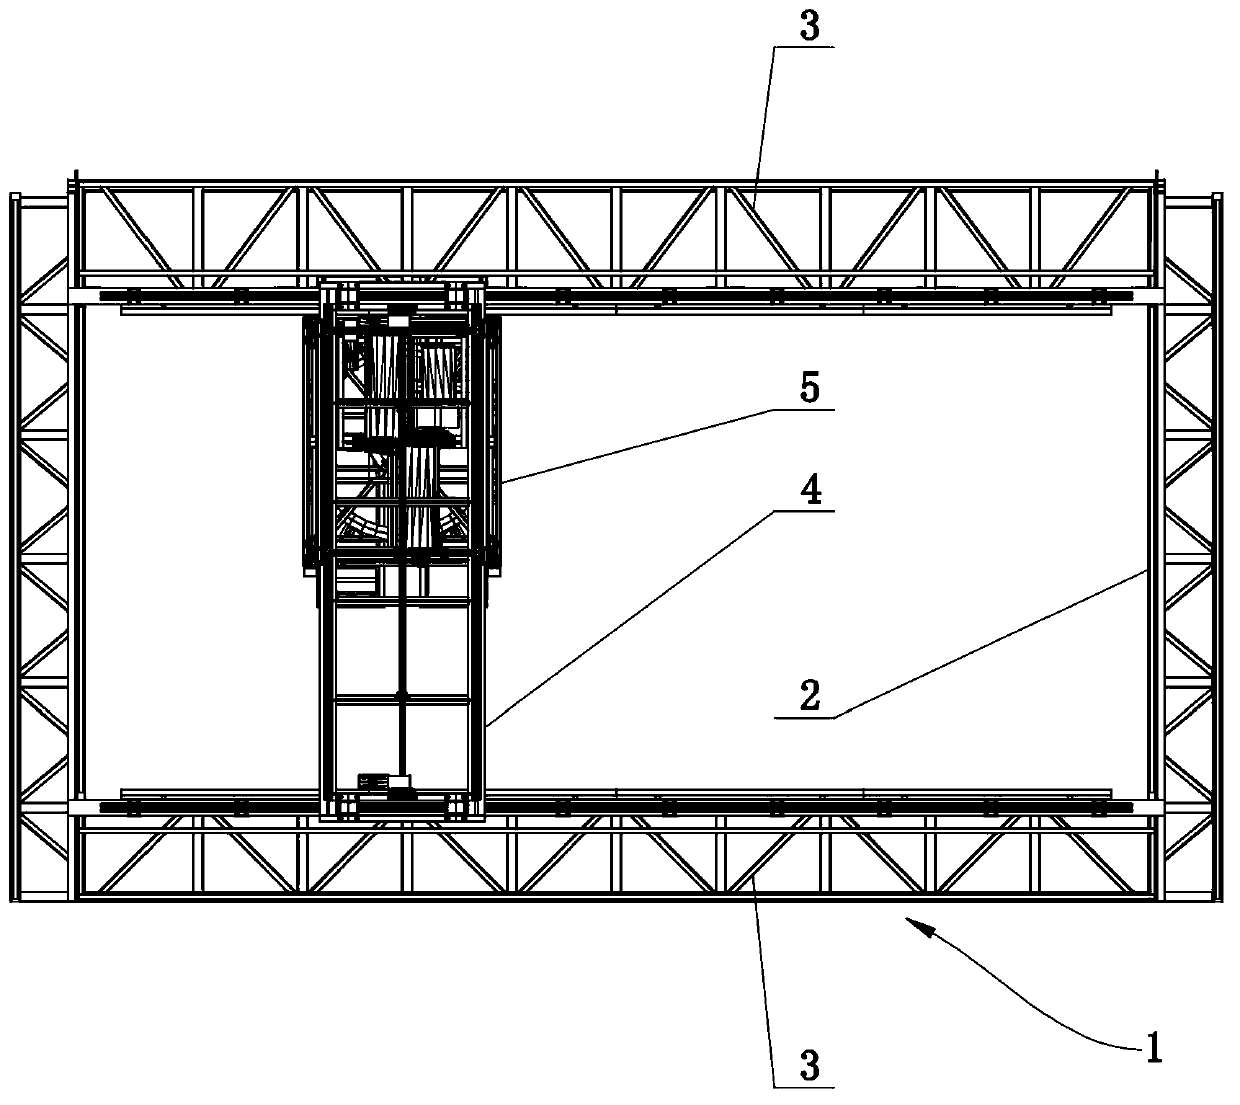 Four-freedom-degree vehicle carrier for three-dimensional parking equipment